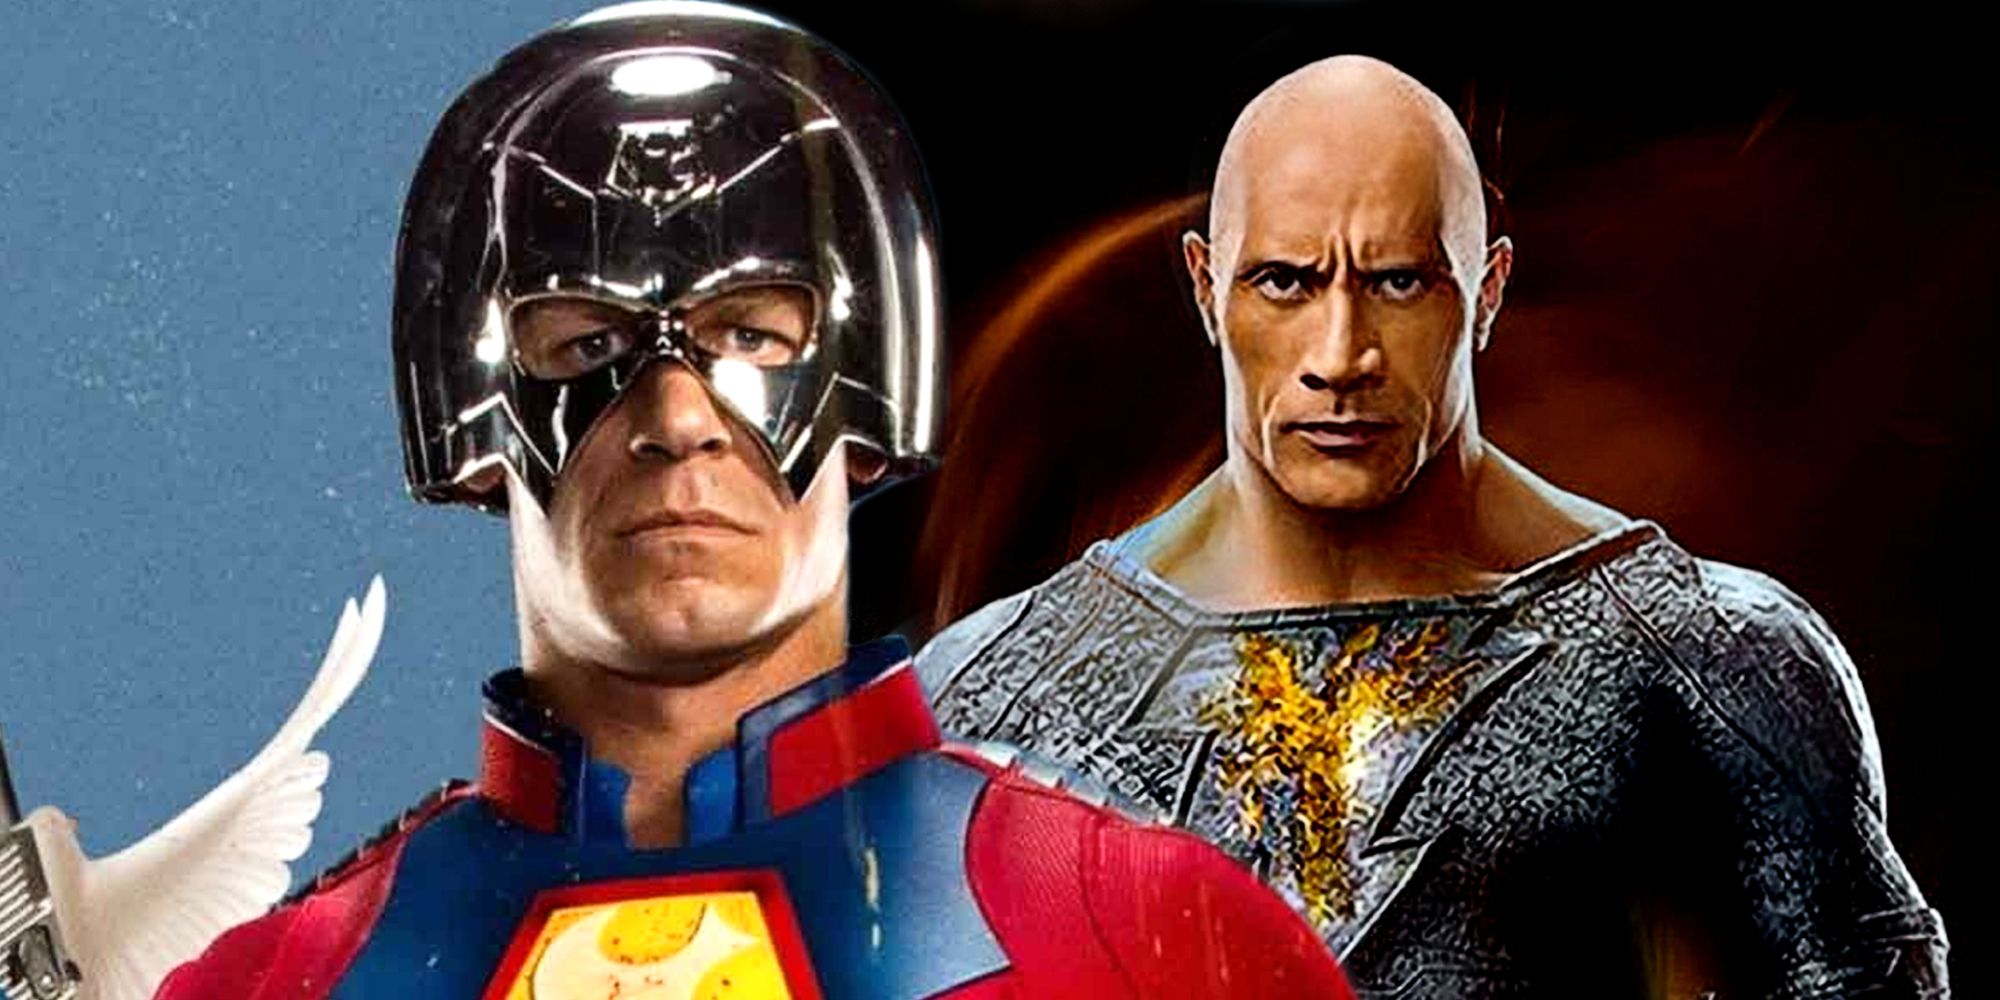 John Cena as Peacemaker and The Rock as Black Adam in the DCEU